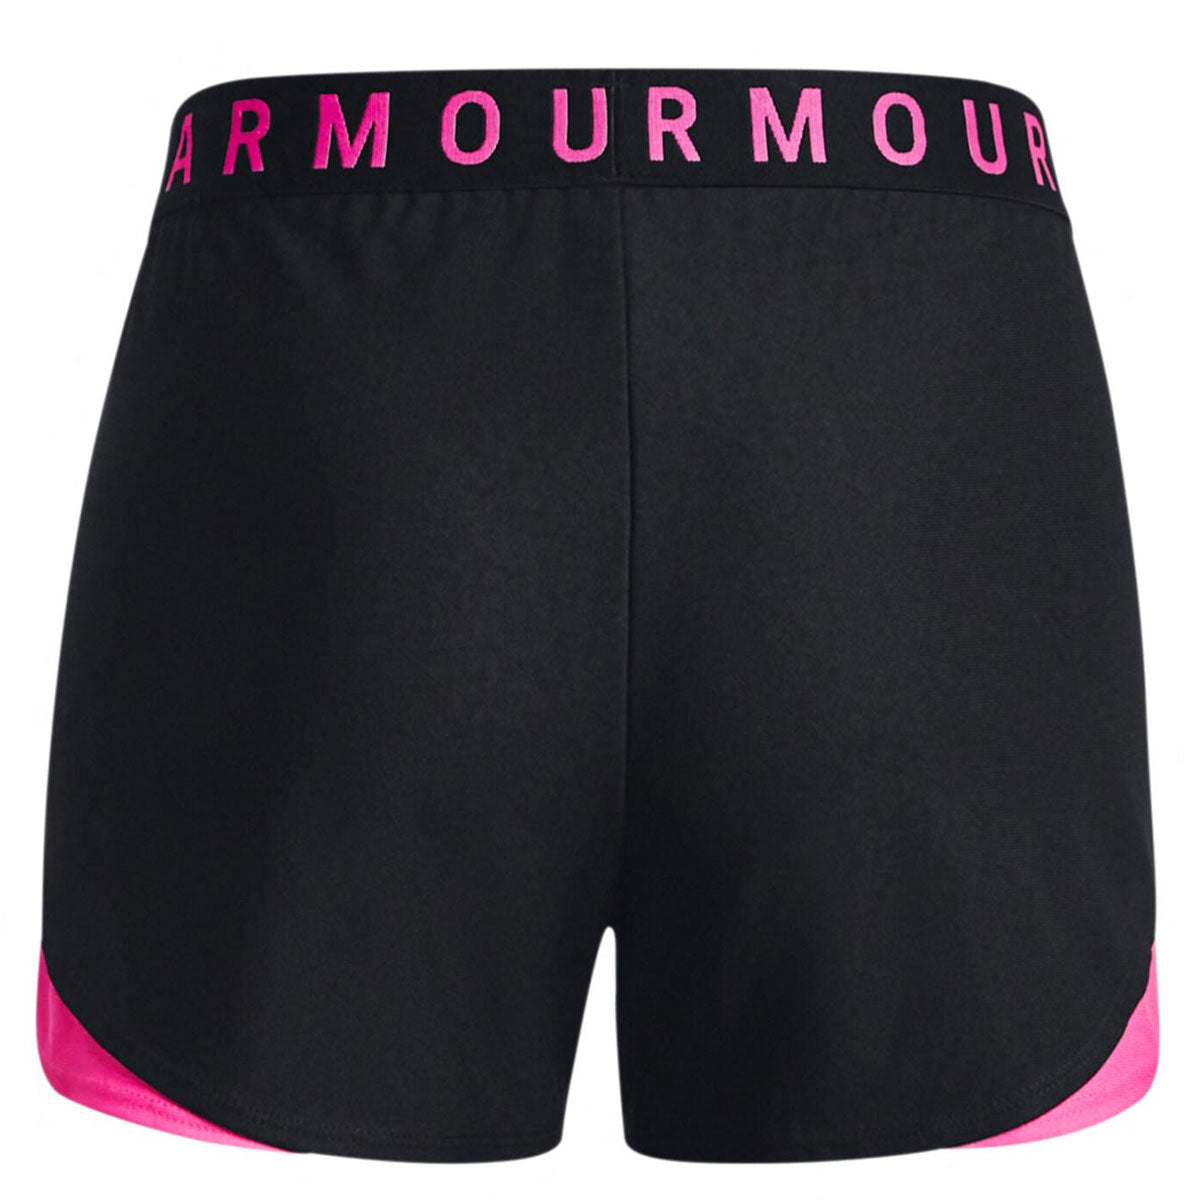 Under Armour Play Up 3.0 Shorts - Womens - Black/Rebel Pink